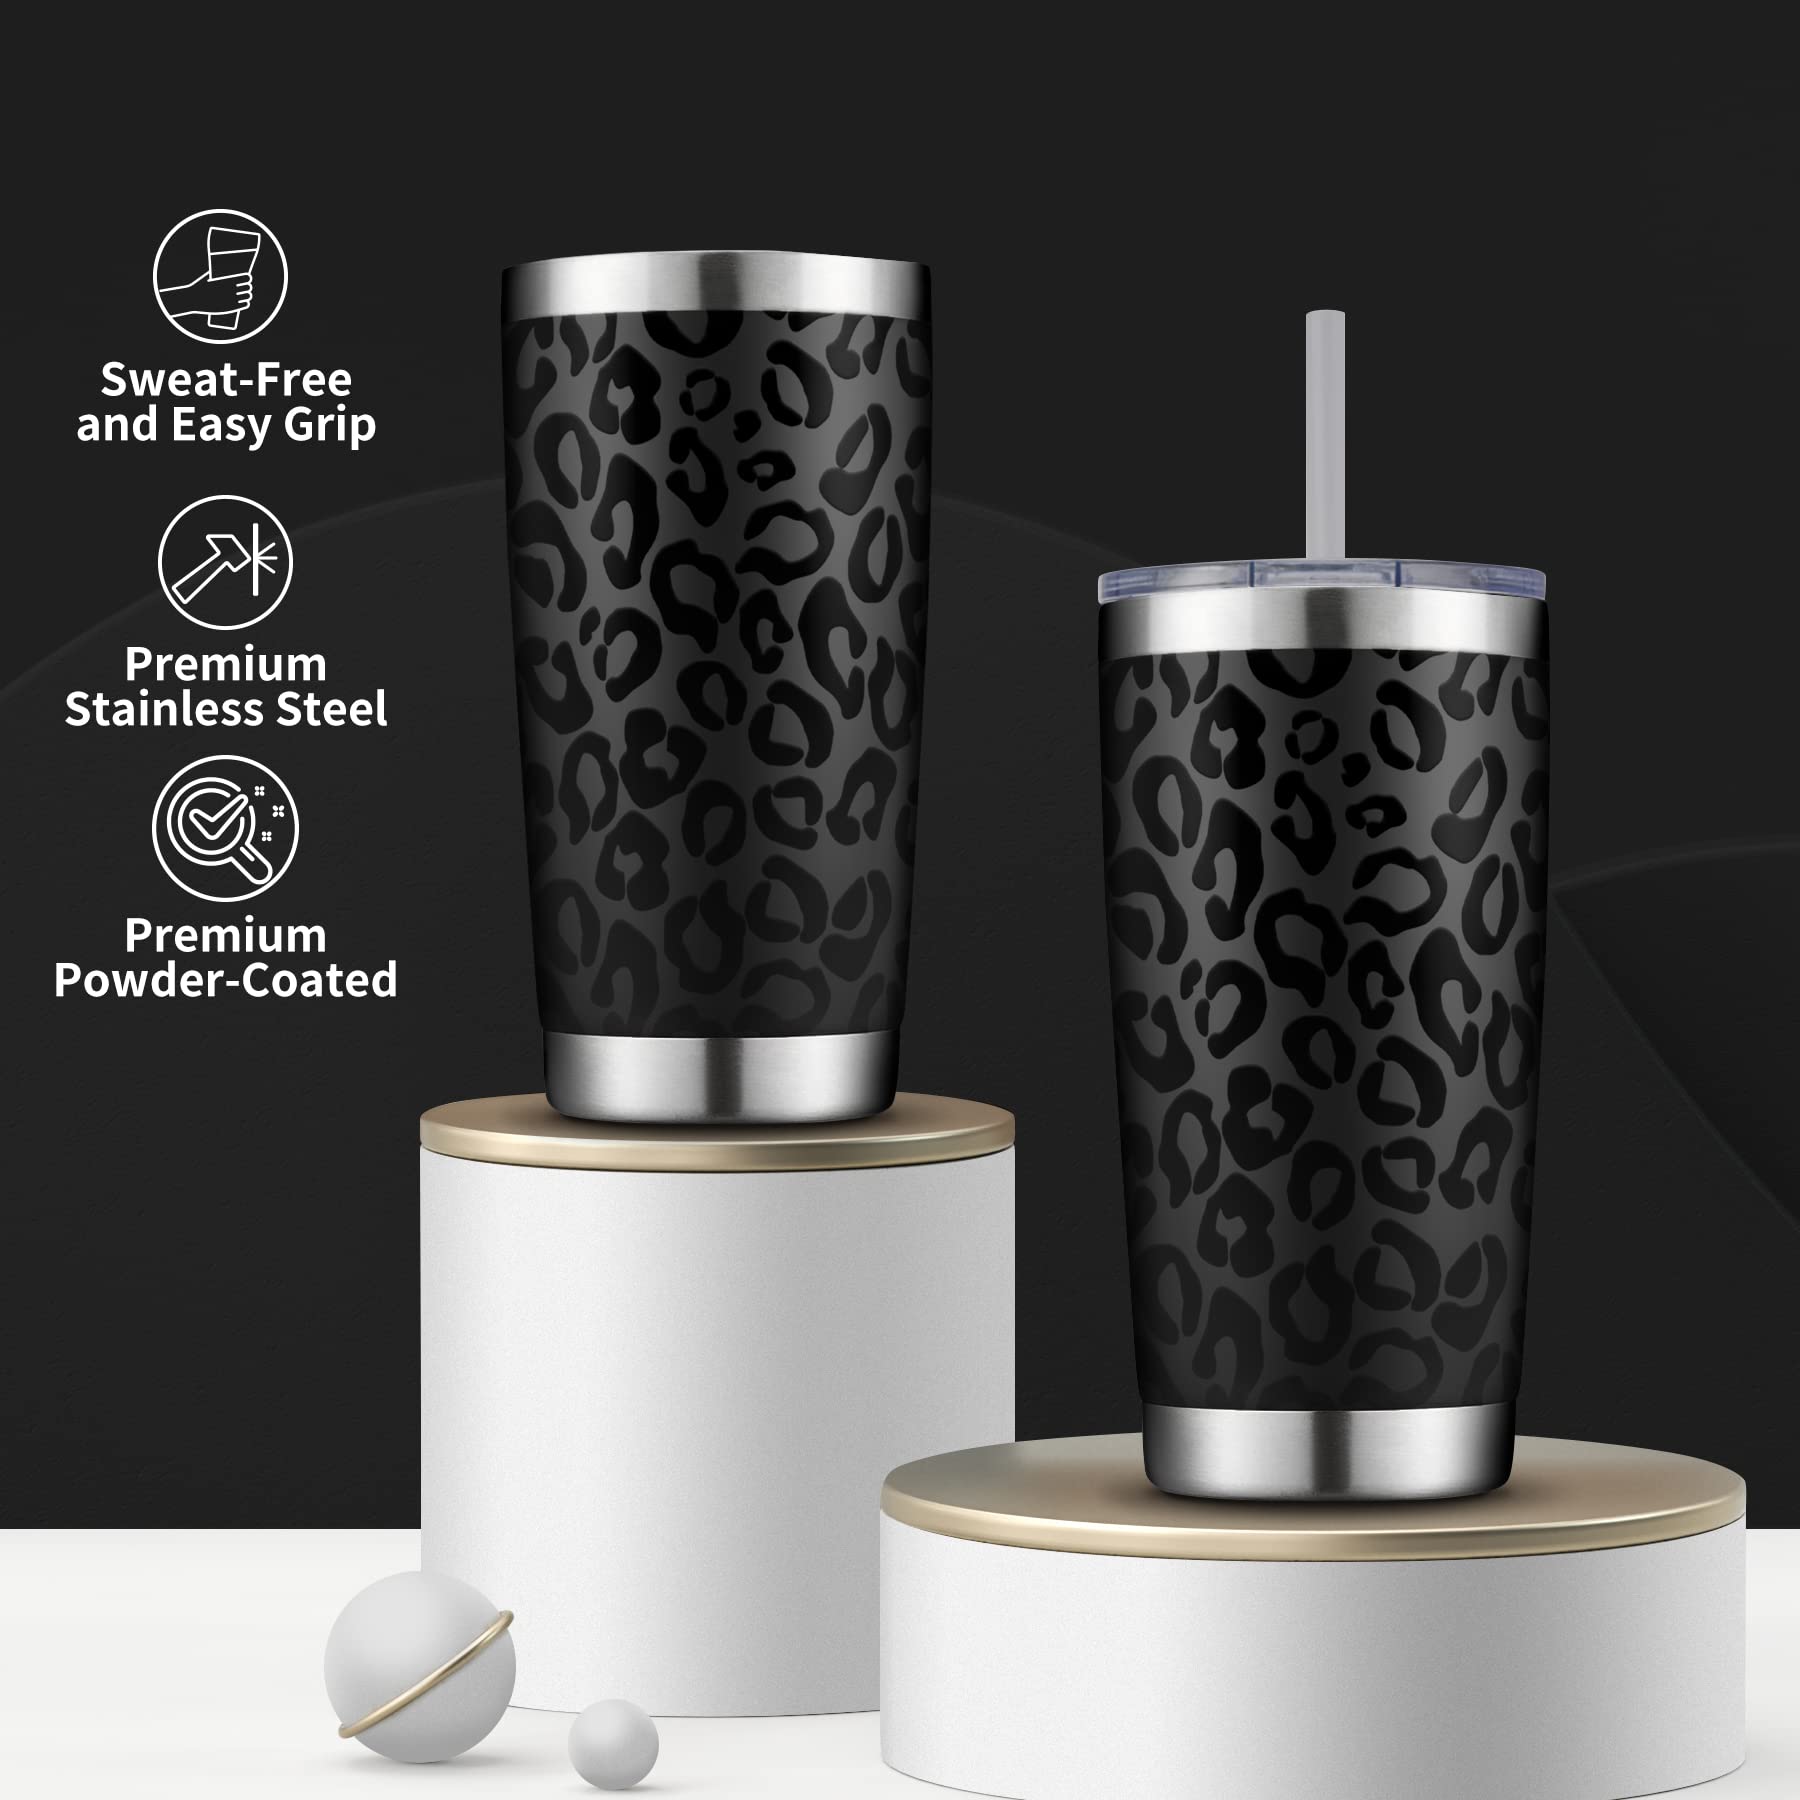 CIVAGO 20oz Insulated Stainless Steel Tumbler, Coffee Tumbler with Lid and Straw, Double Wall Vacuum Travel Coffee Mug, Powder Coated Tumbler Cup for Hot and Cold Drinks (Black Leopard, 1 Pack)